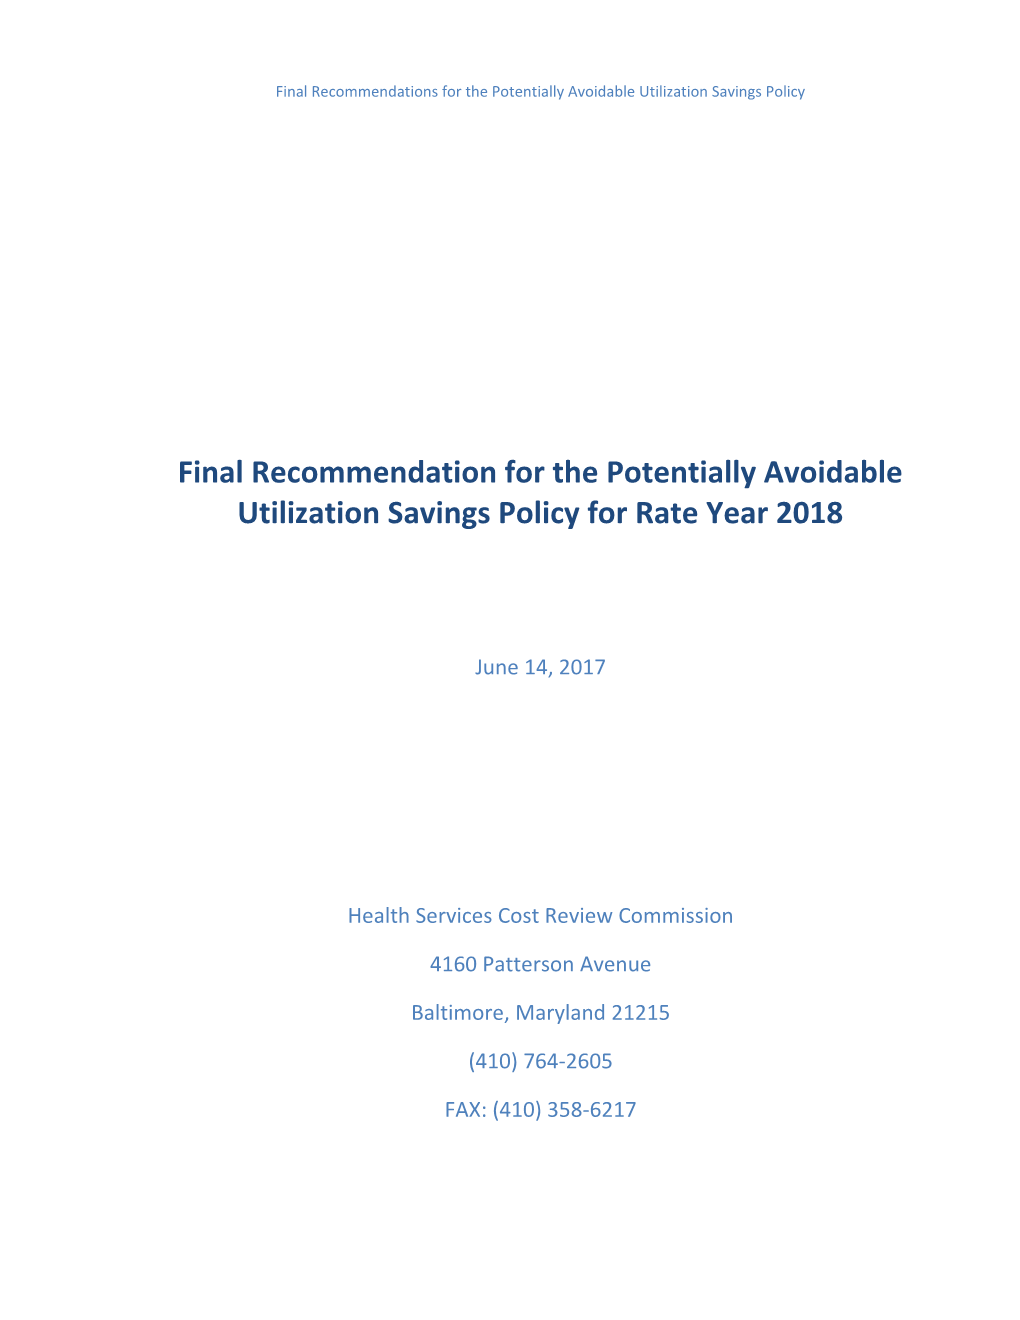 Final Recommendation for the Potentially Avoidable Utilization Savings Policy for Rate